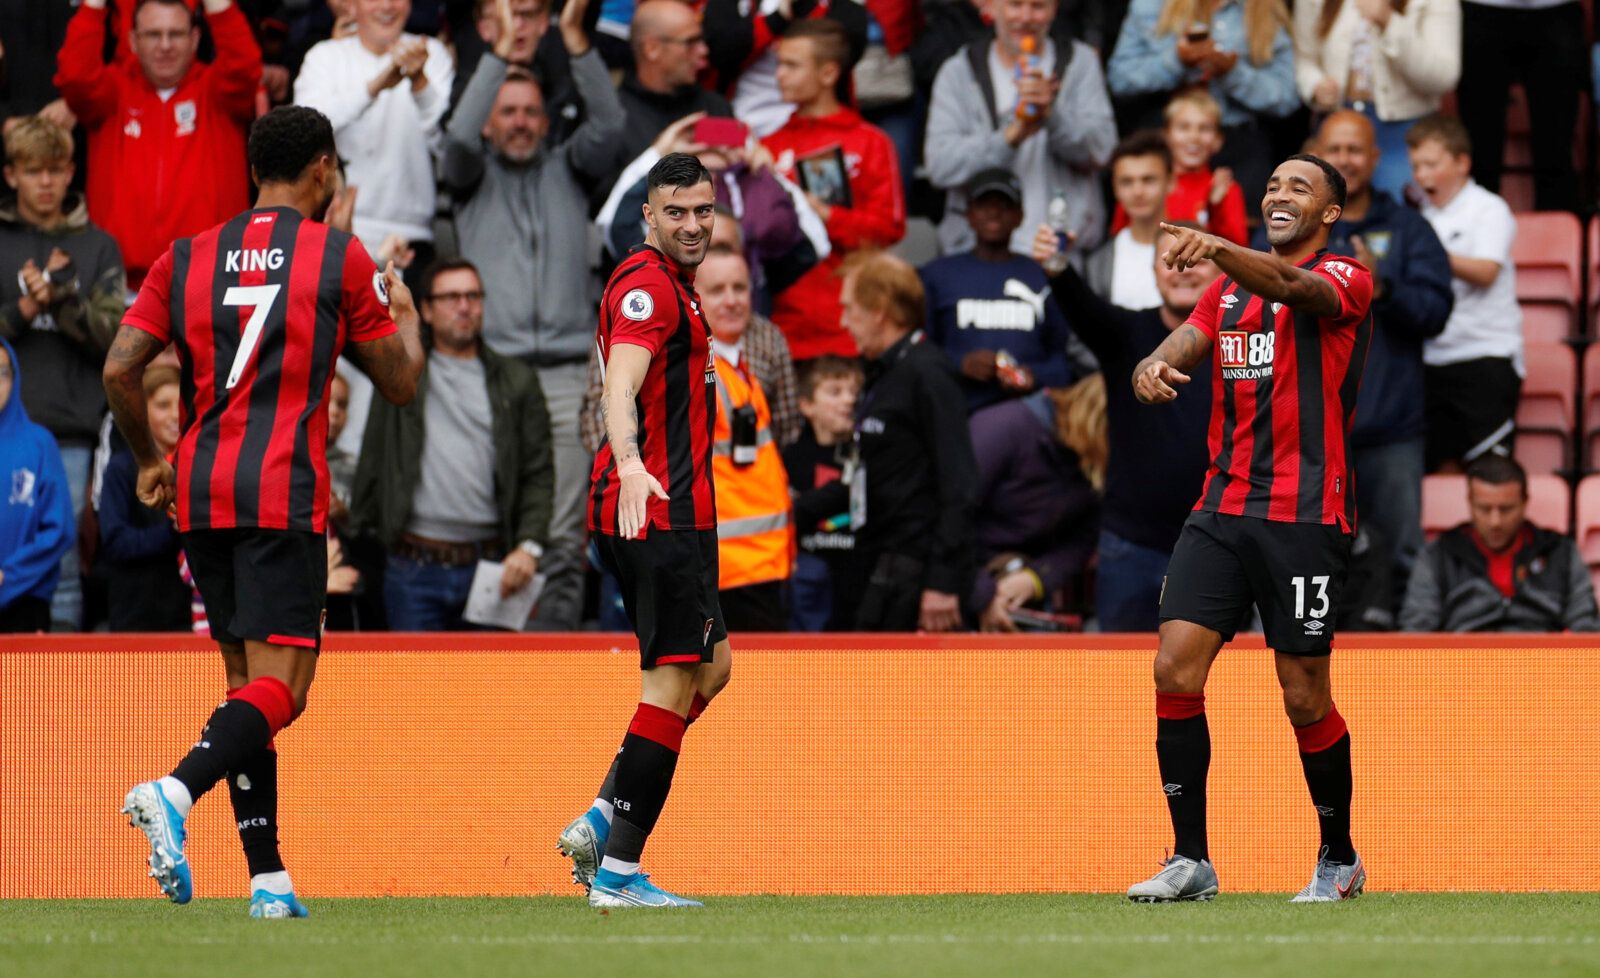 Soccer Football - Premier League - AFC Bournemouth v West Ham United - Vitality Stadium, Bournemouth, Britain - September 28, 2019  Bournemouth's Callum Wilson celebrates scoring their second goal with teammates  Action Images via Reuters/John Sibley  EDITORIAL USE ONLY. No use with unauthorized audio, video, data, fixture lists, club/league logos or 